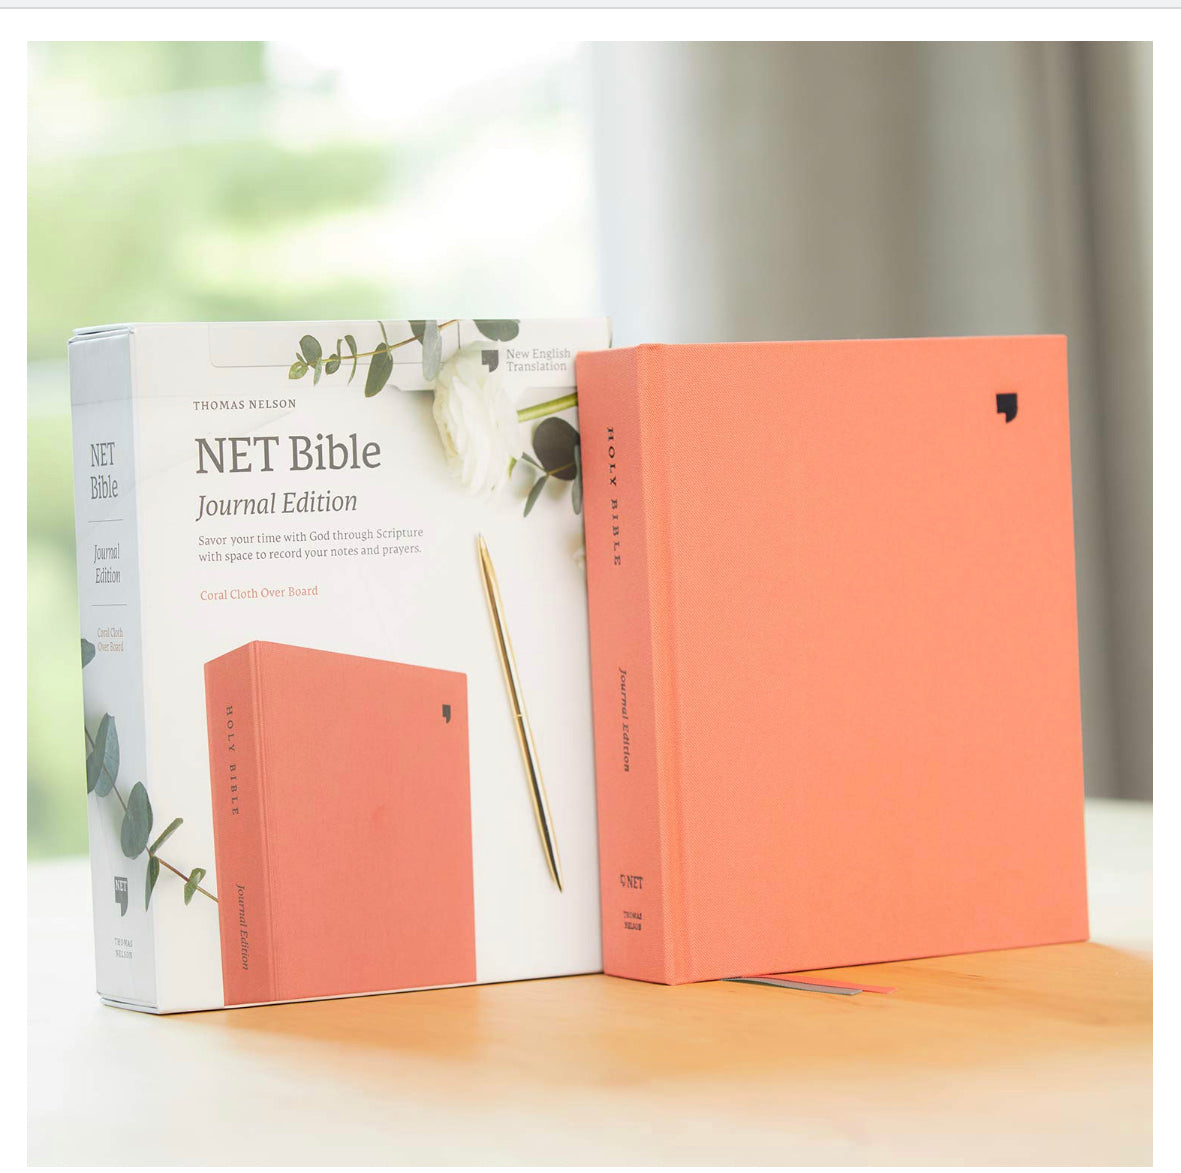 NET Bible, Journal Edition, Cloth over Board, Coral, Comfort Print: Holy Bible Hardcover